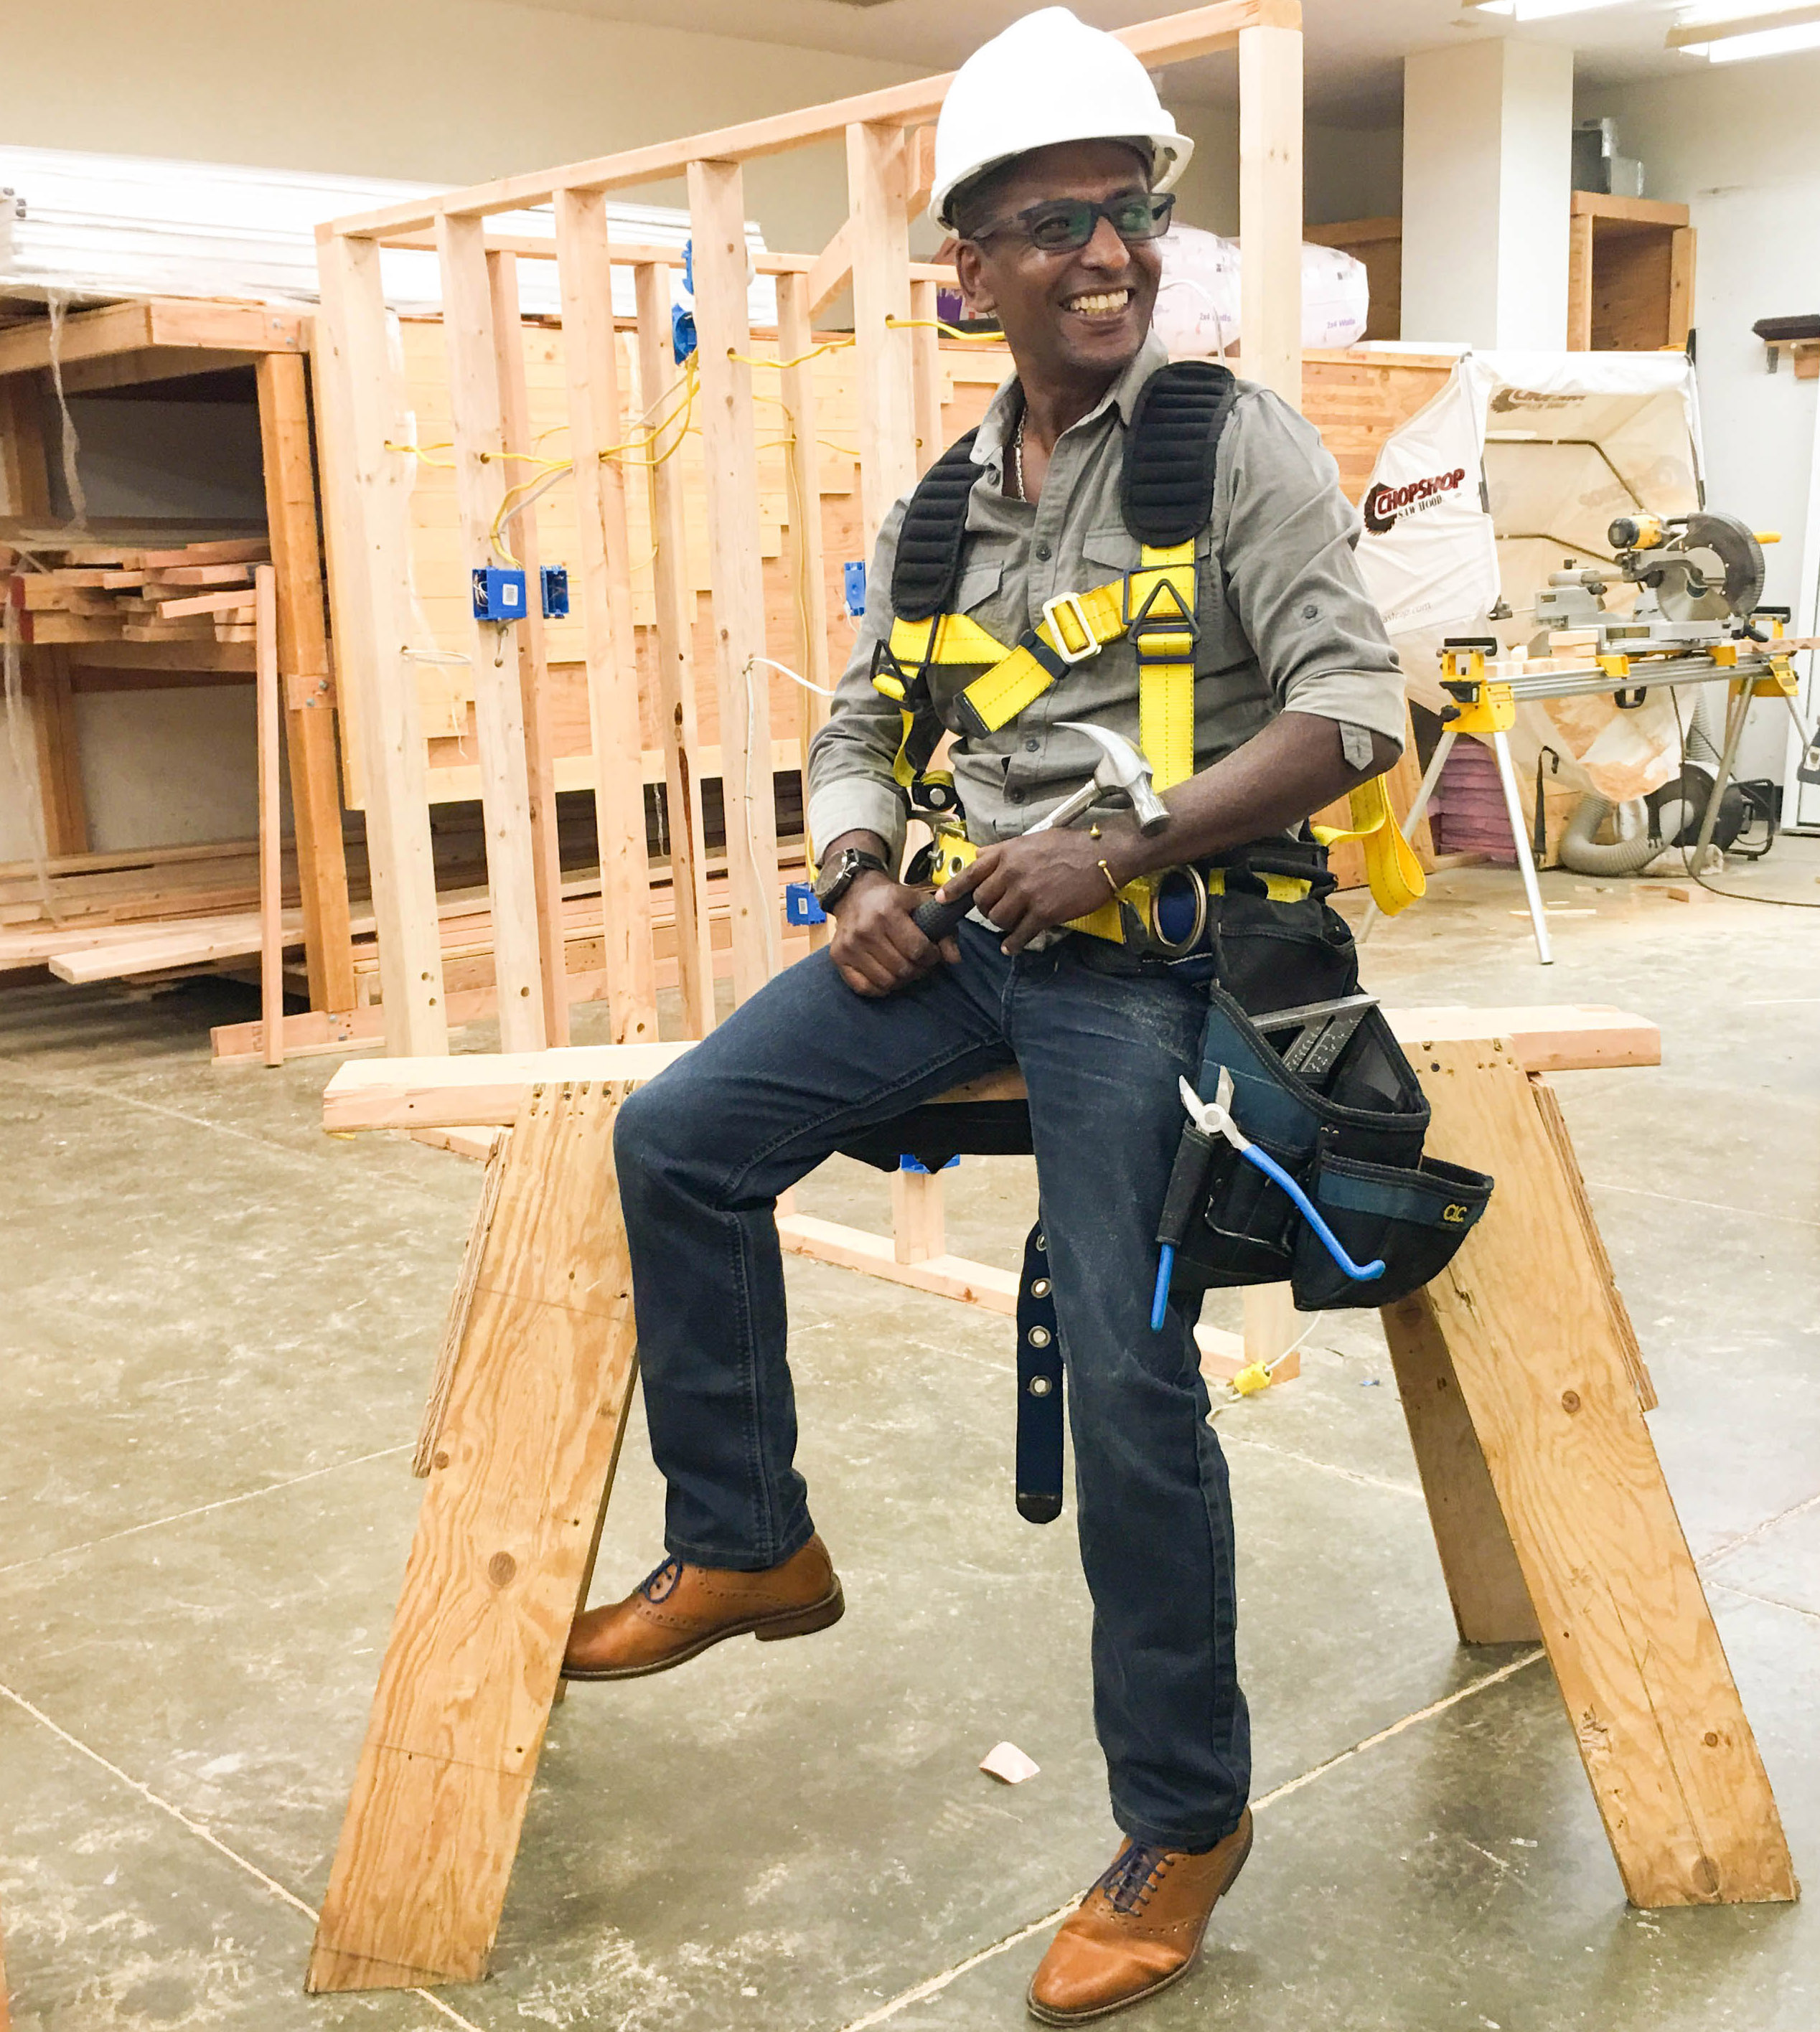 Man is construction gear seated on a saw horse